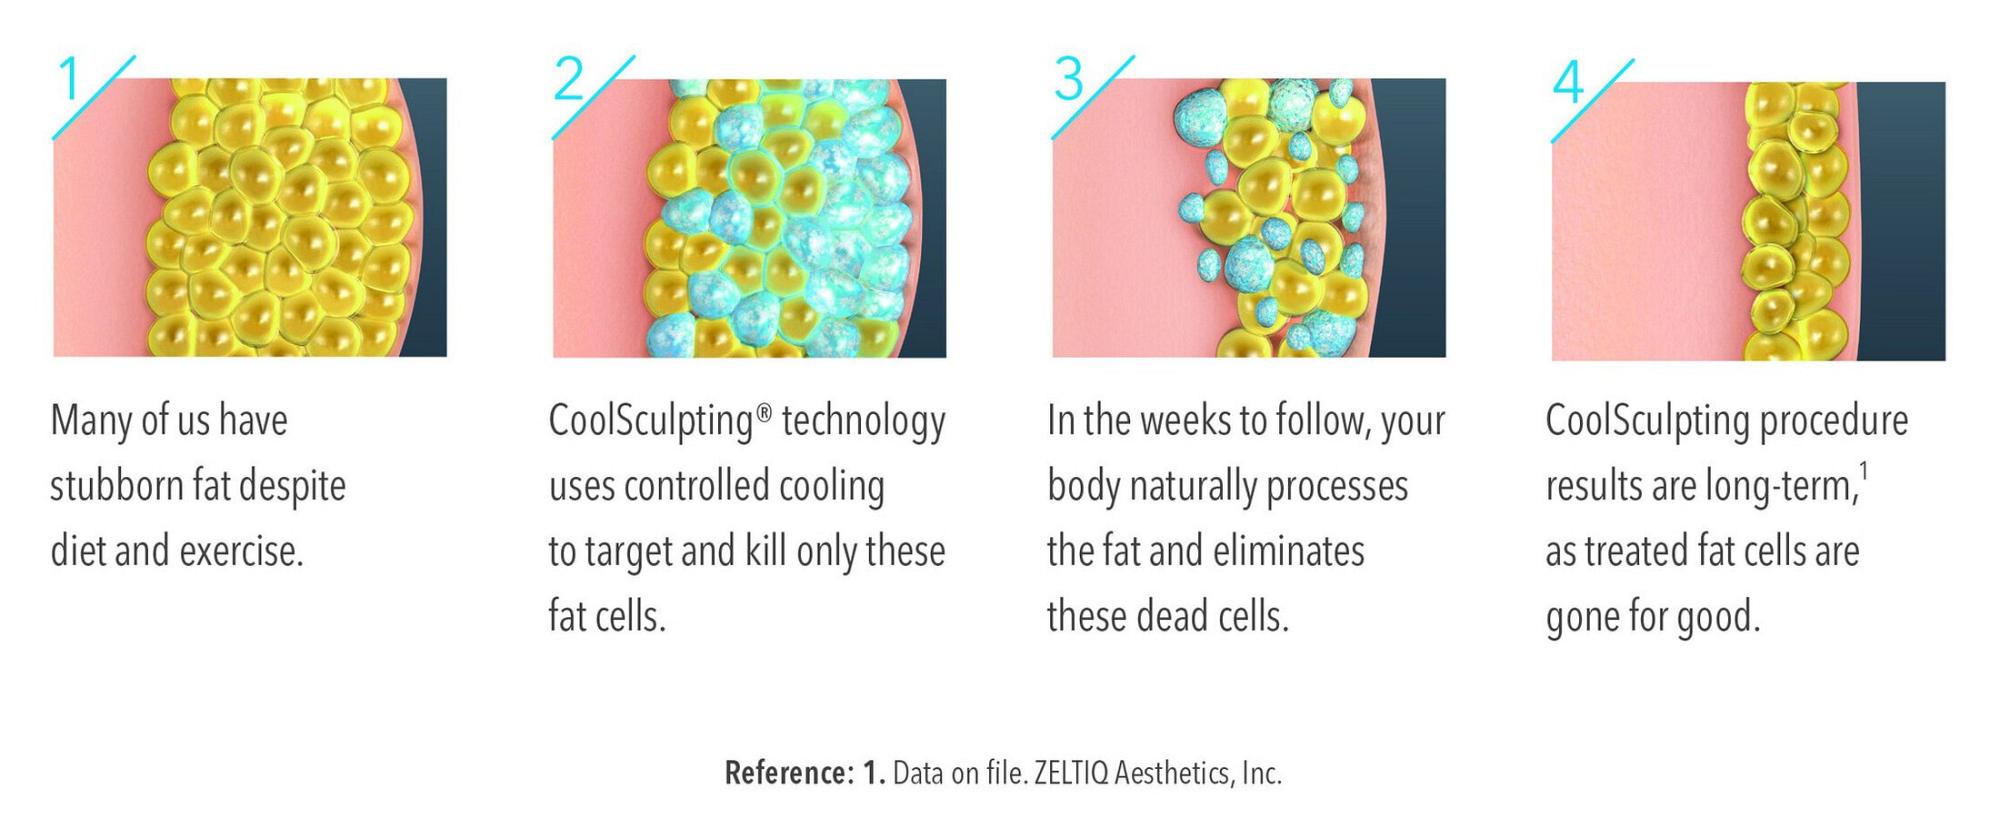 CoolSculpting process infographic